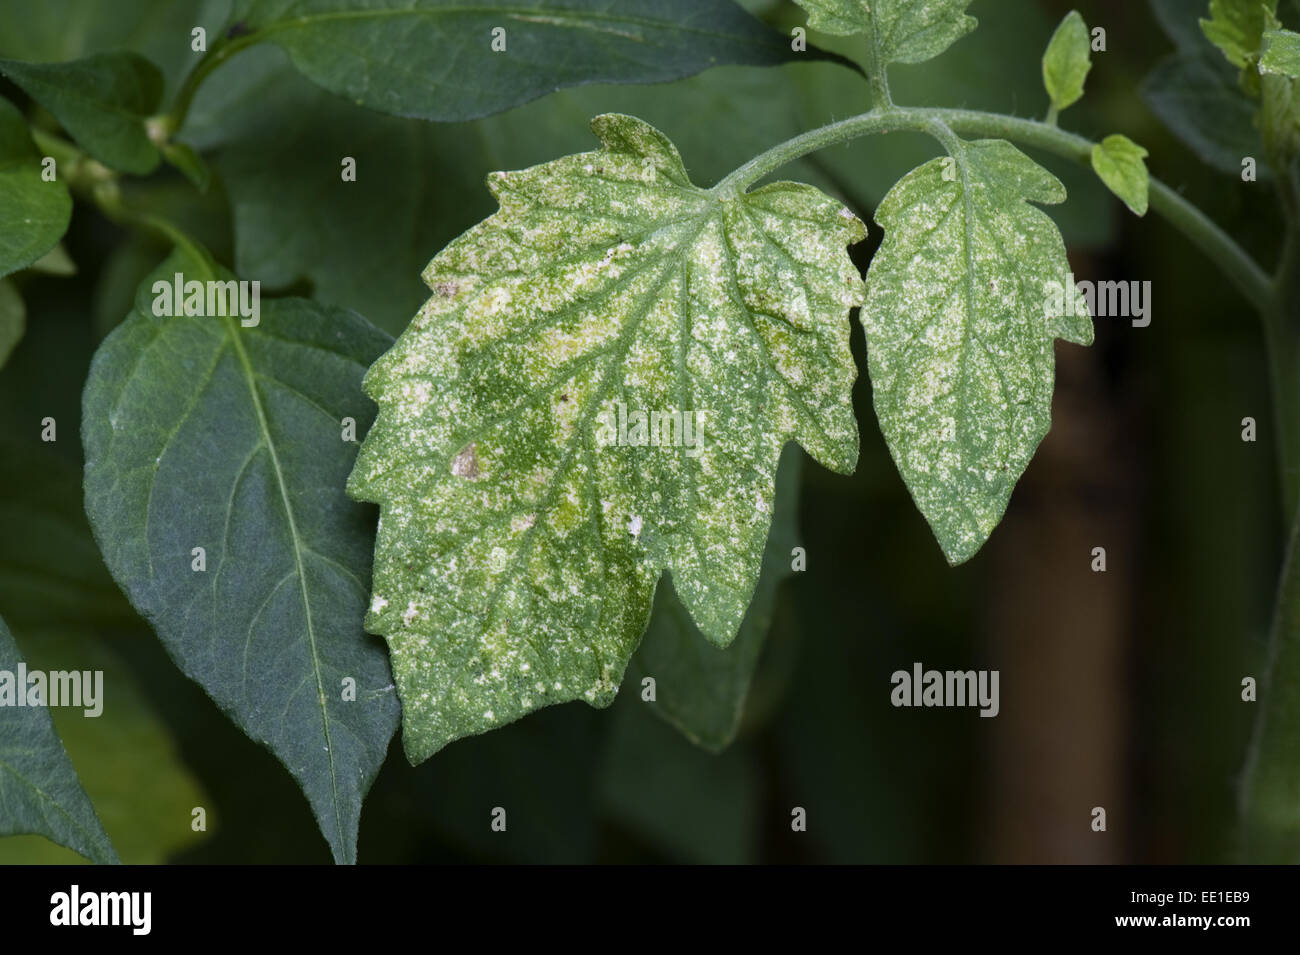 Damage to tomato leaves by two-spotted or red spider mites, Tetranychus urticae in a garden greenhouse Stock Photo